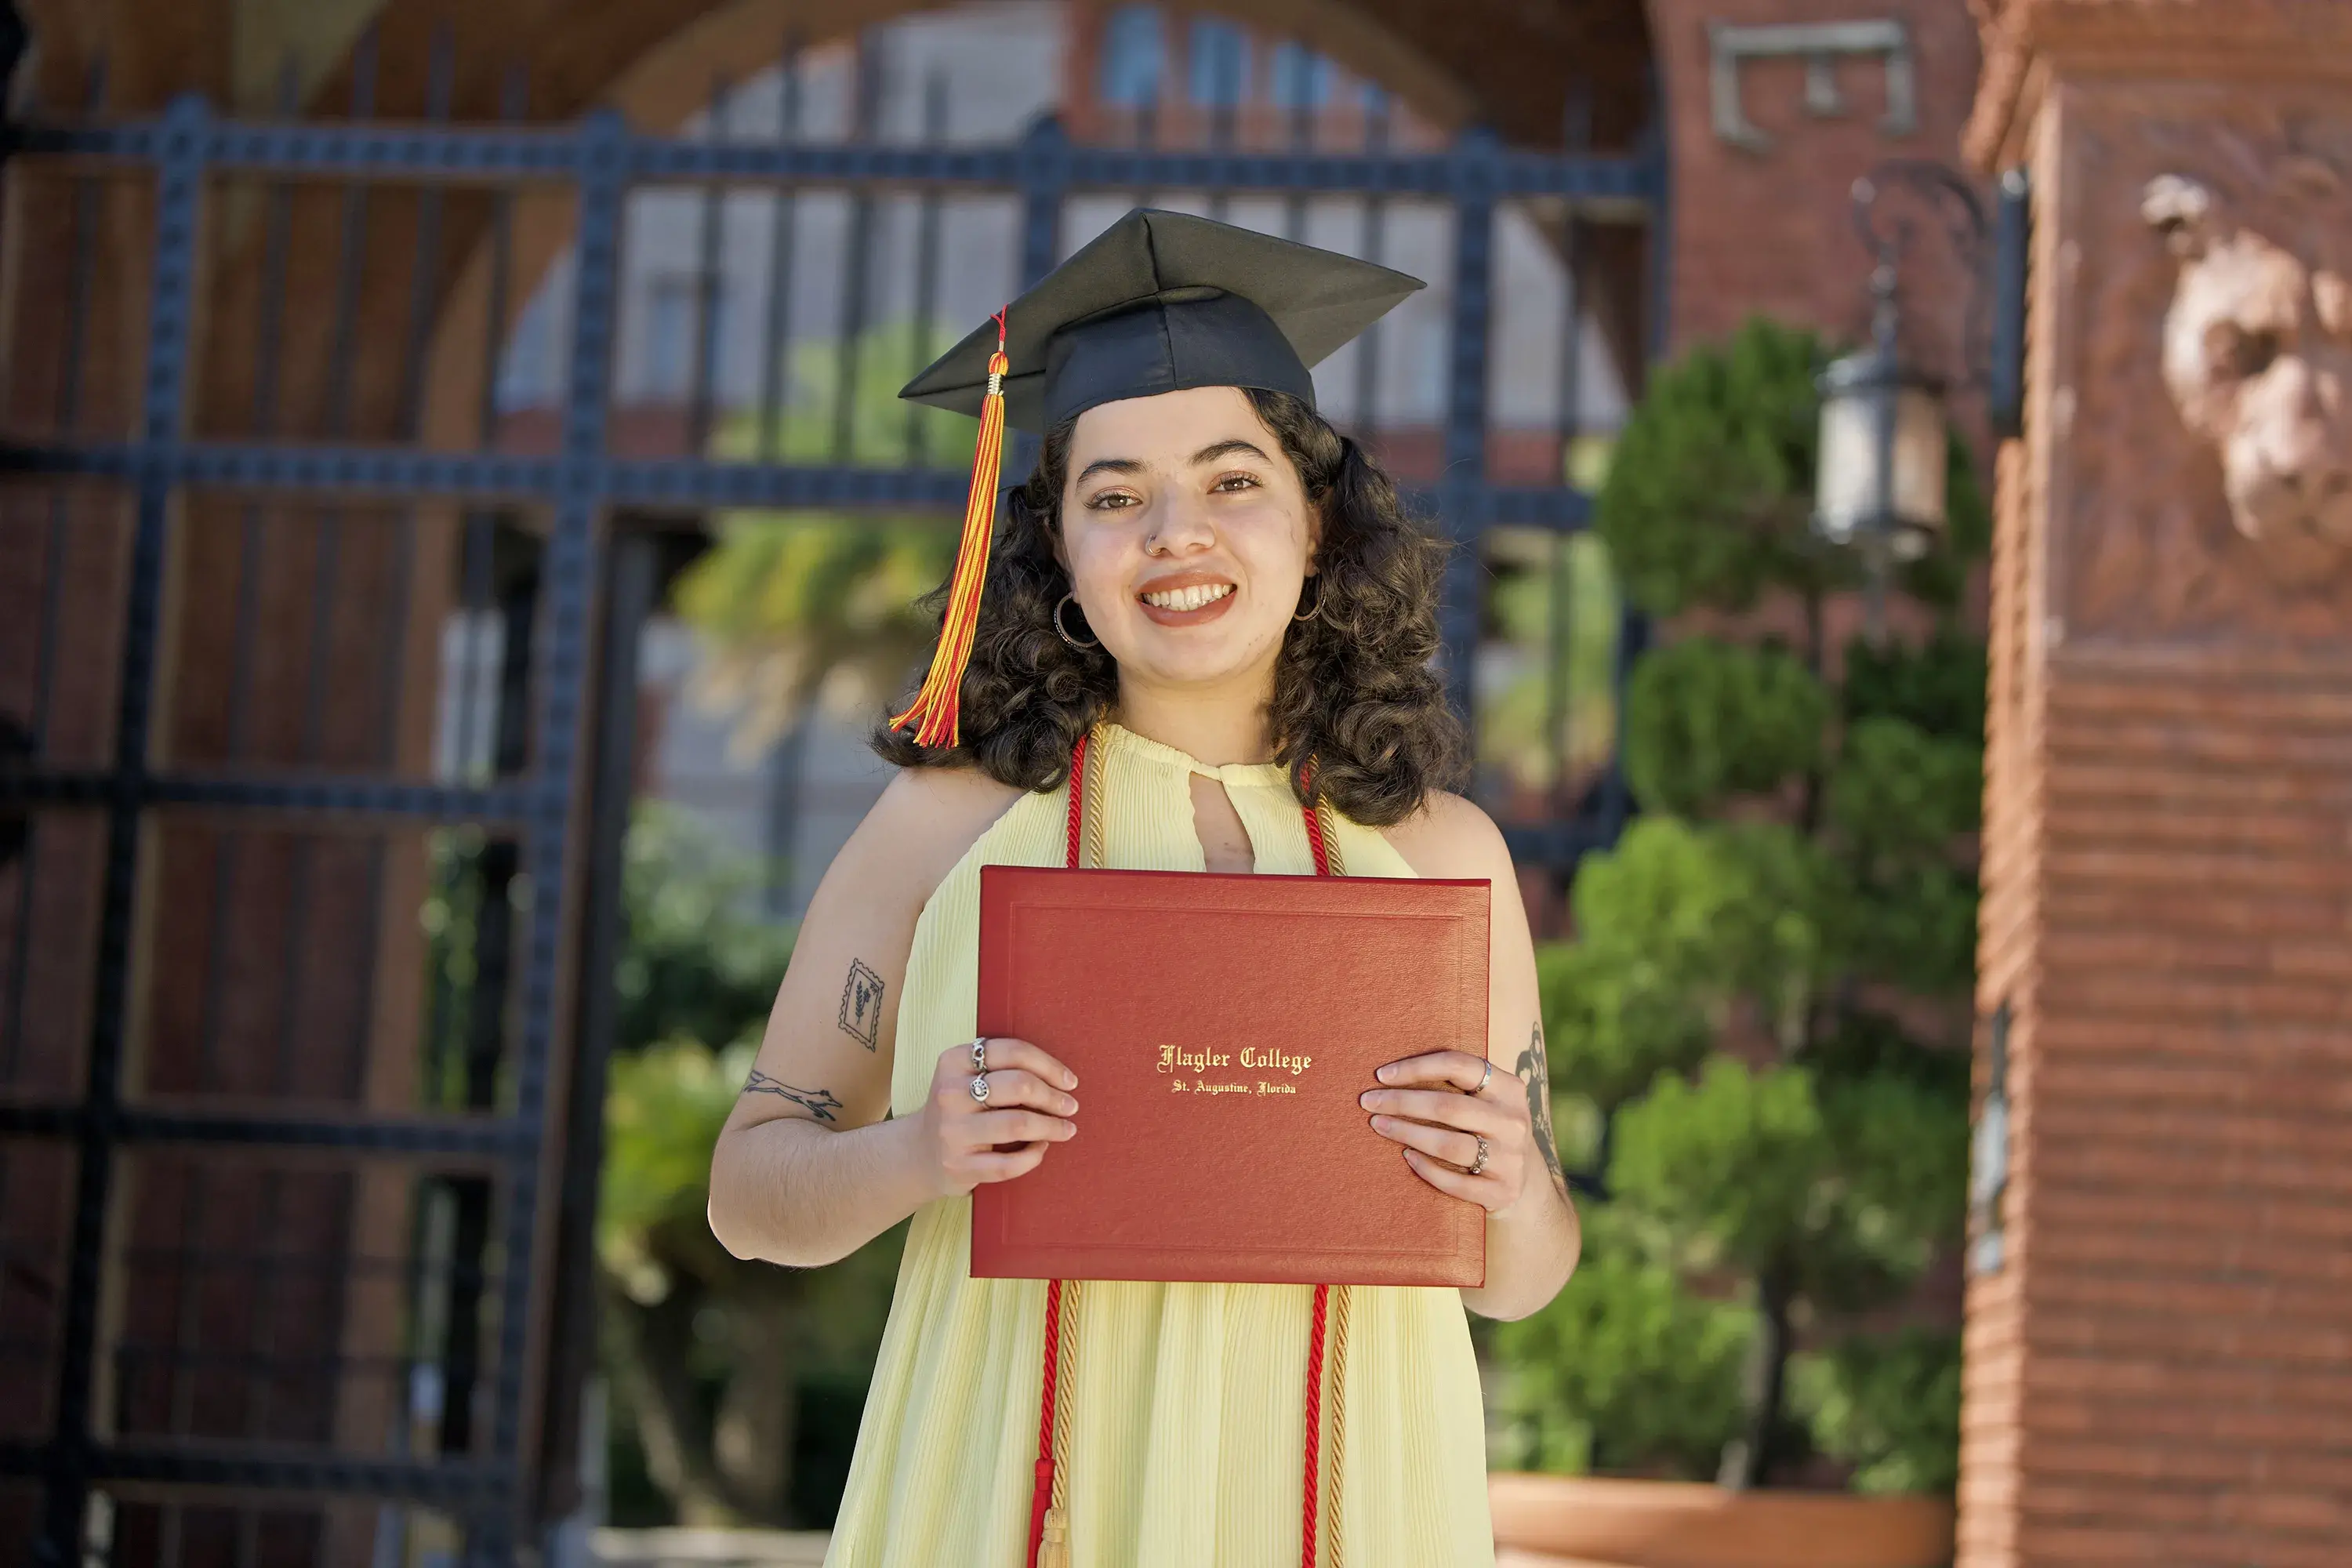 Alana holding diploma in front of courtyard gates